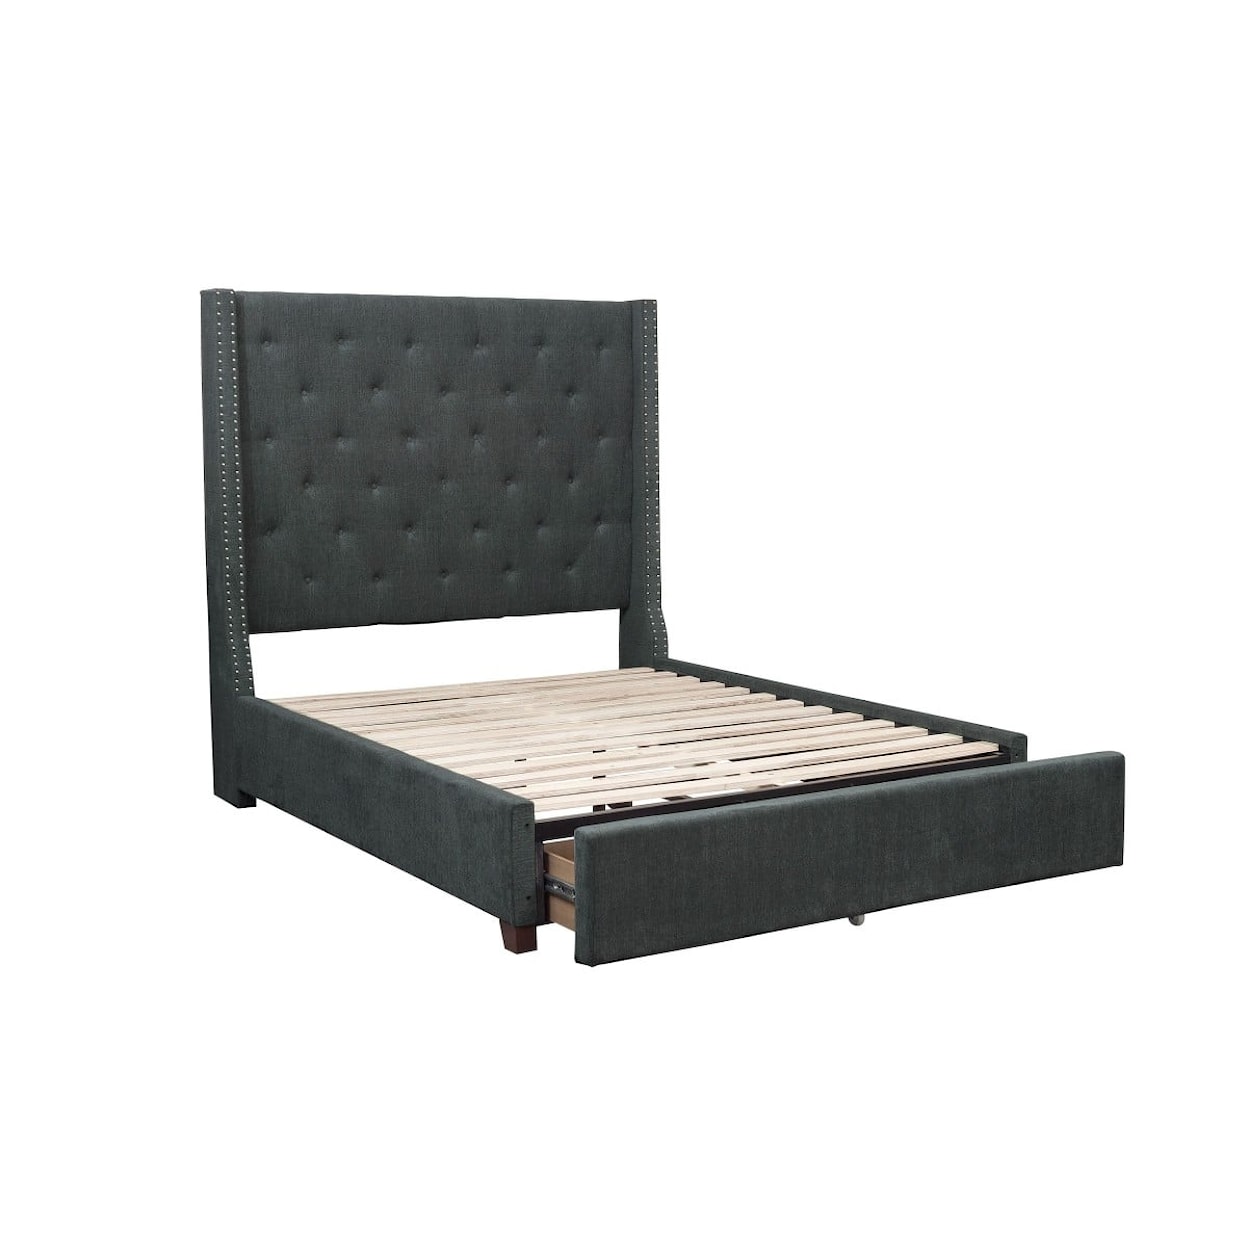 Homelegance Fairborn King  Bed with Storage FB